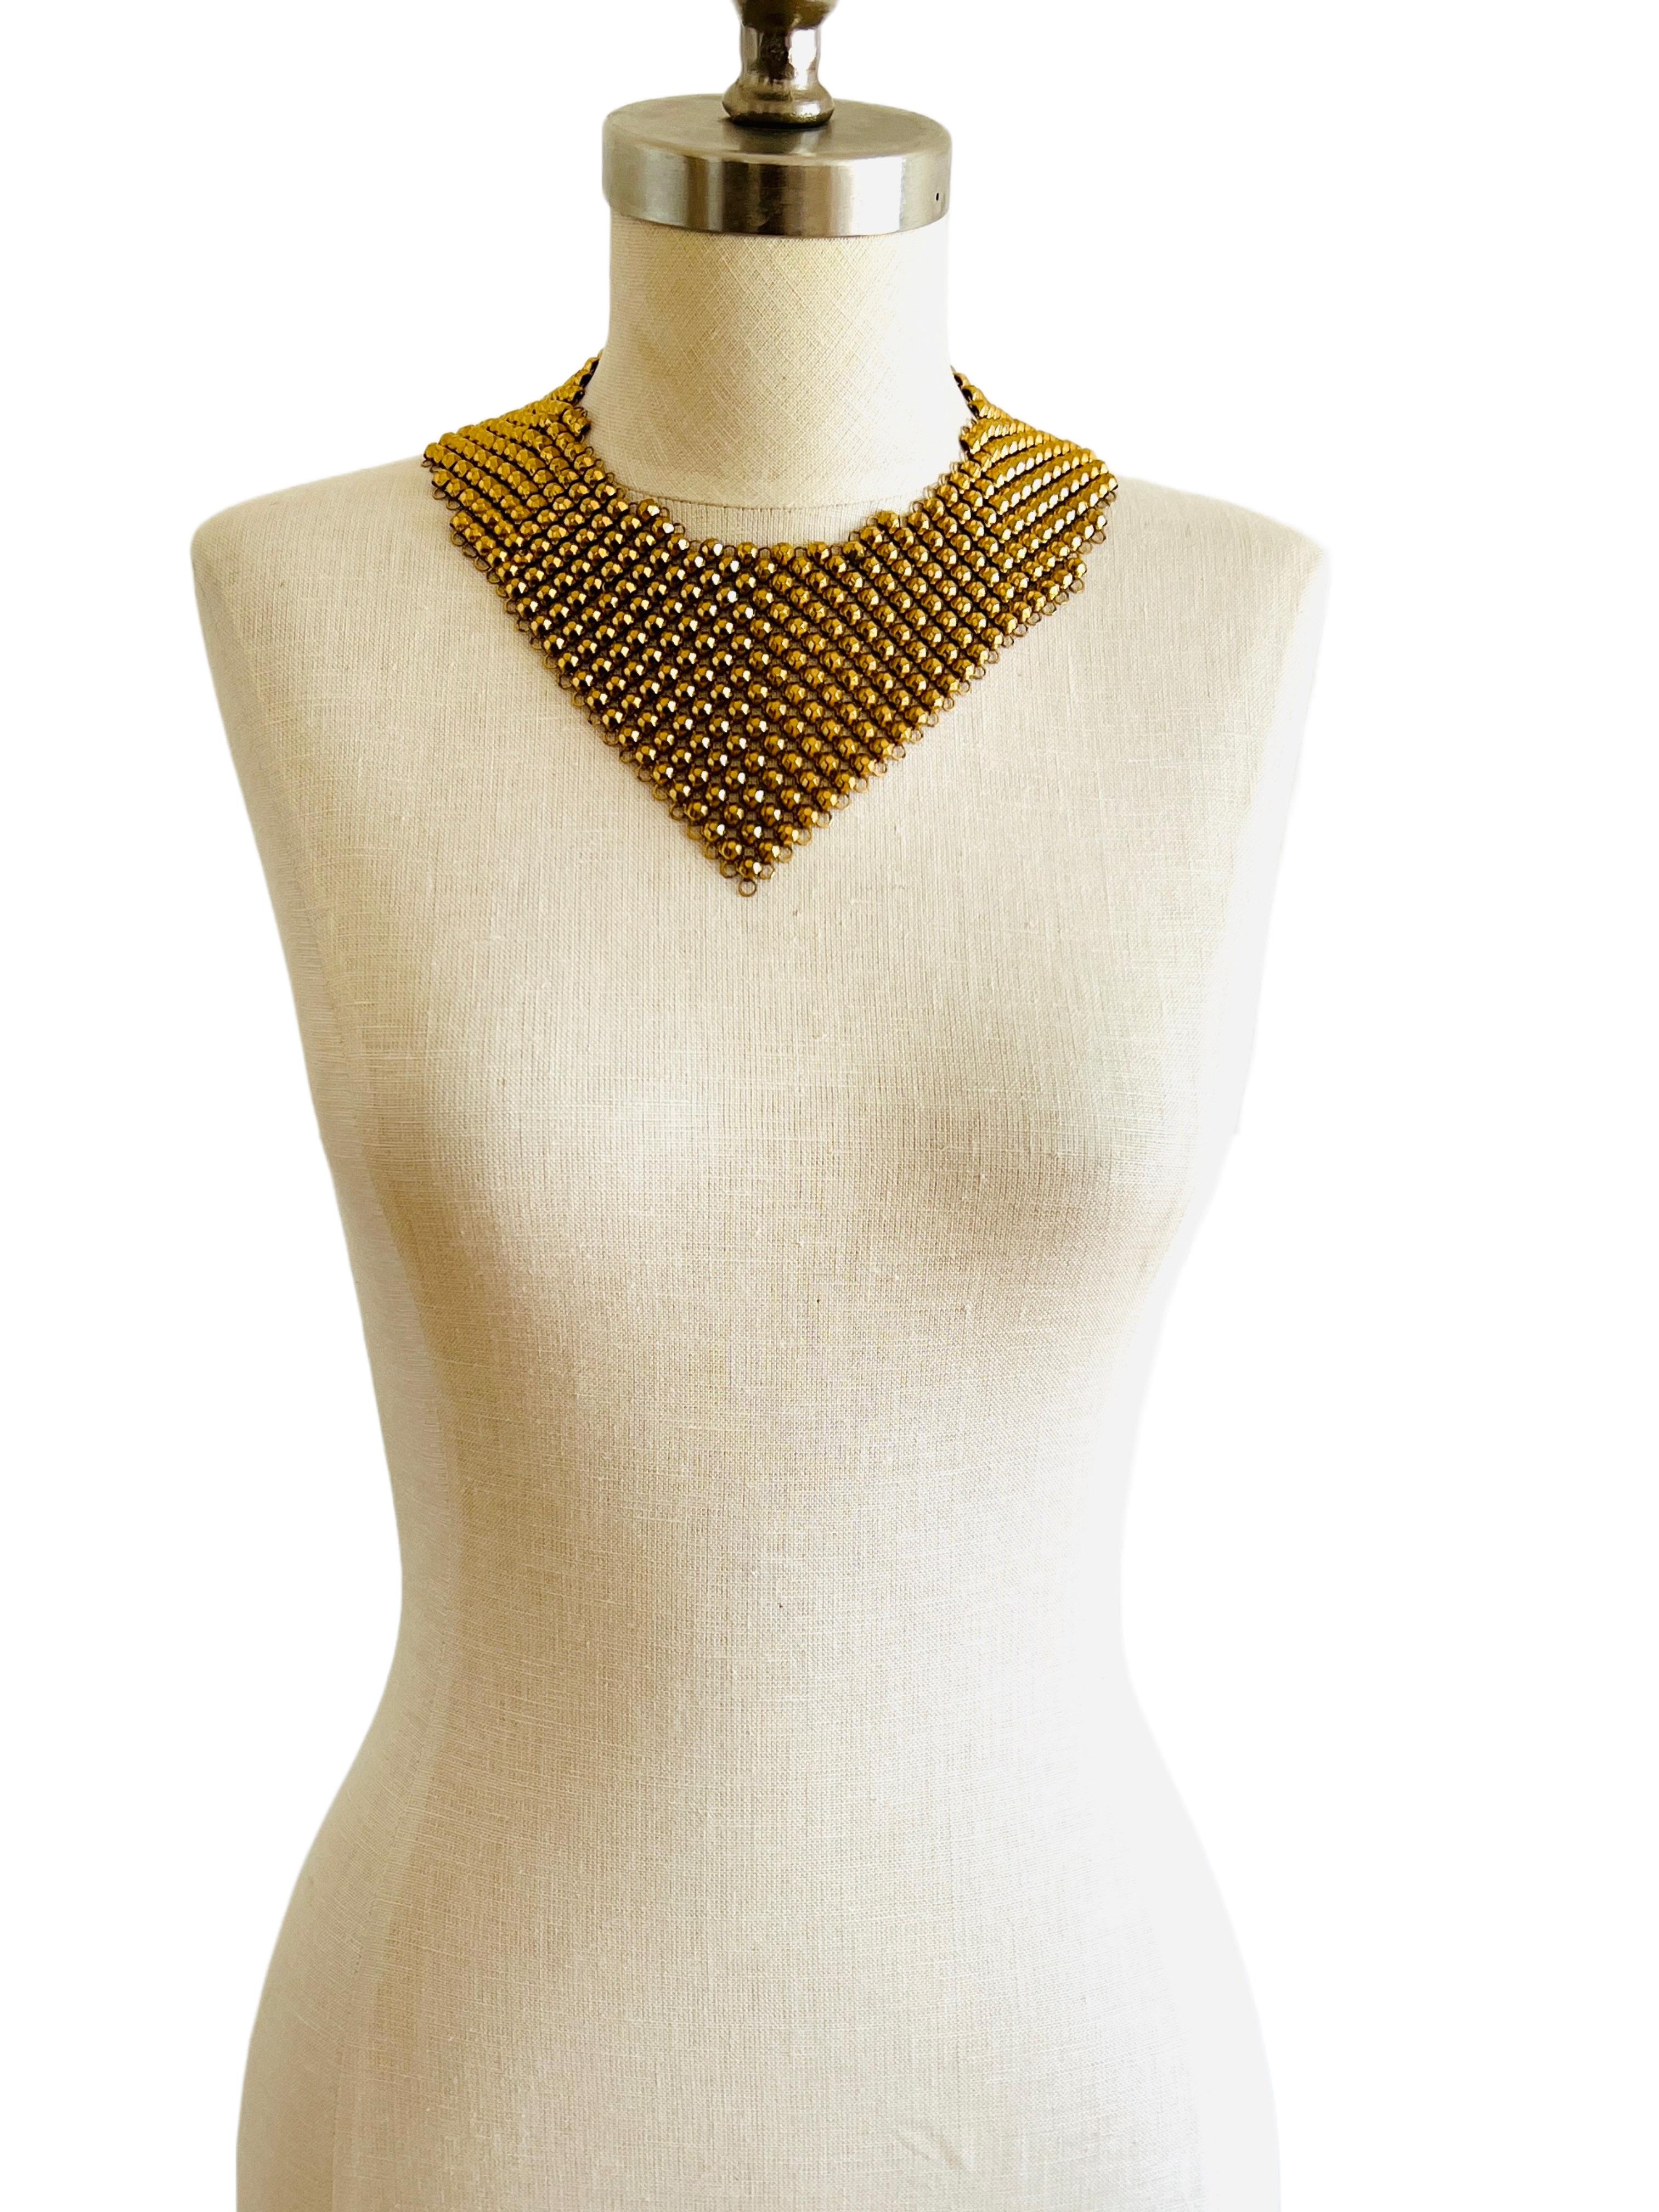 Retro Faceted Beads Gold Mesh Bib Choker Necklace & Bracelet Set In Good Condition For Sale In Sausalito, CA